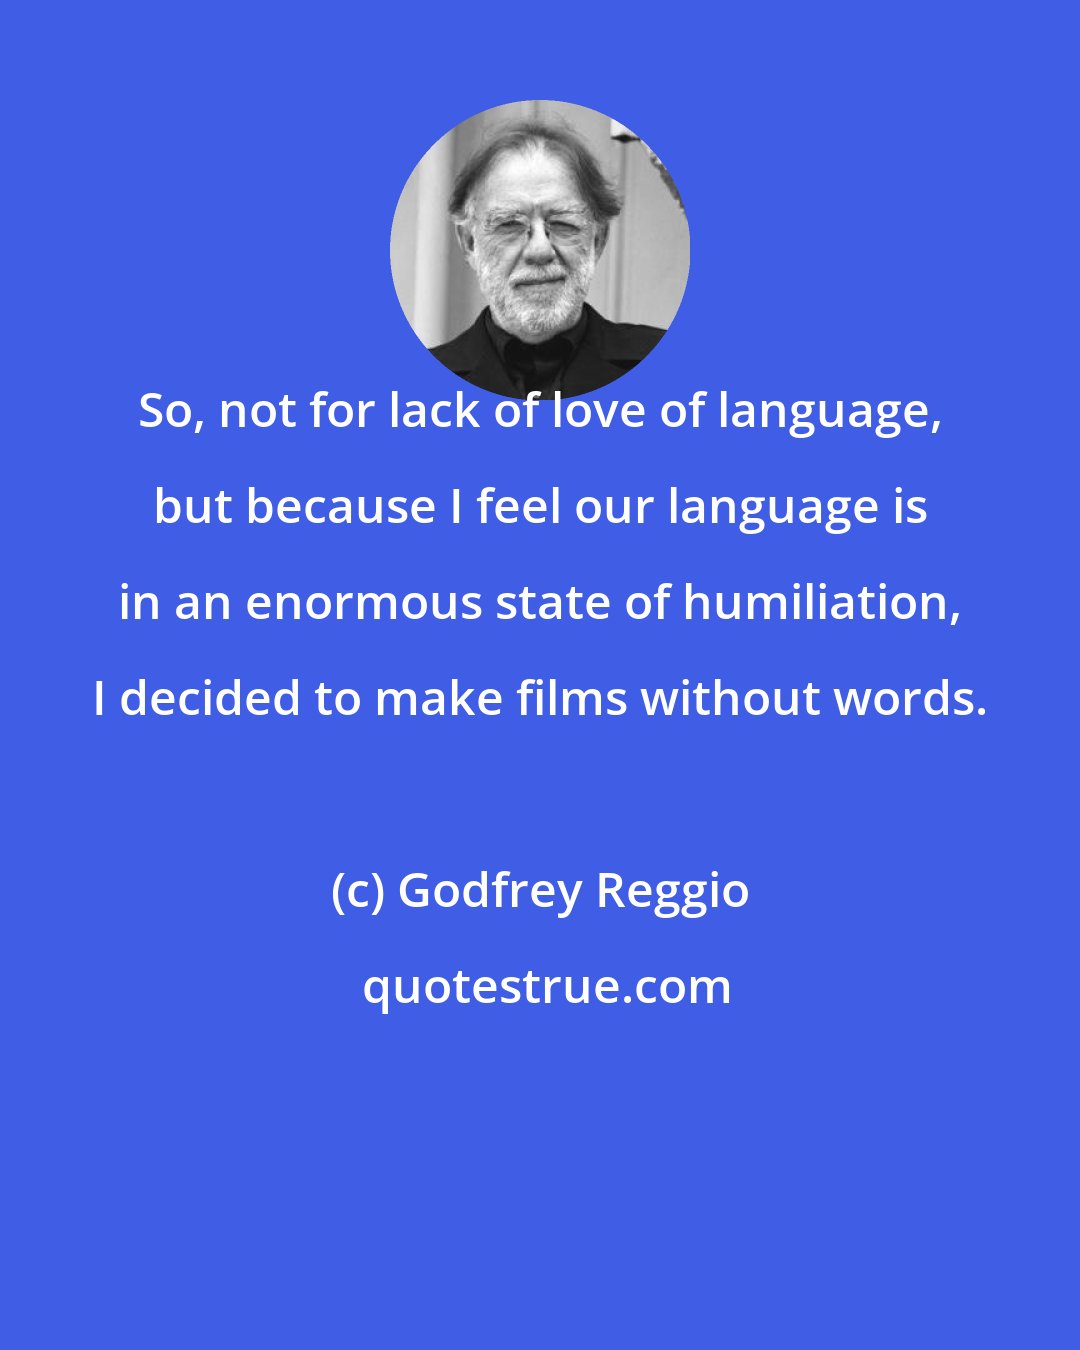 Godfrey Reggio: So, not for lack of love of language, but because I feel our language is in an enormous state of humiliation, I decided to make films without words.